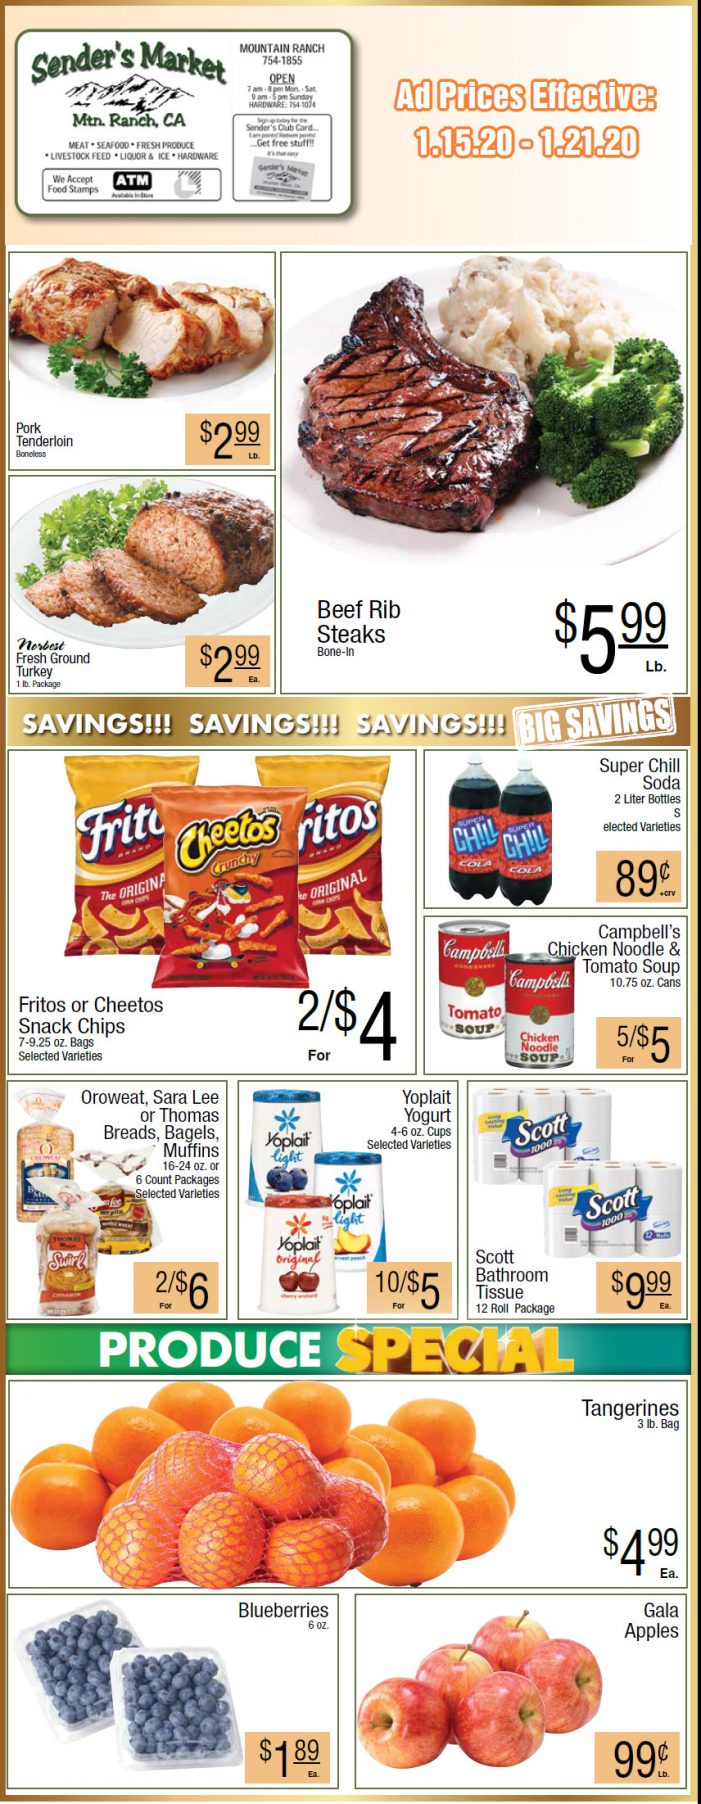 Sender’s Market’s Grocery Ad & Grocery Specials Through January 21st